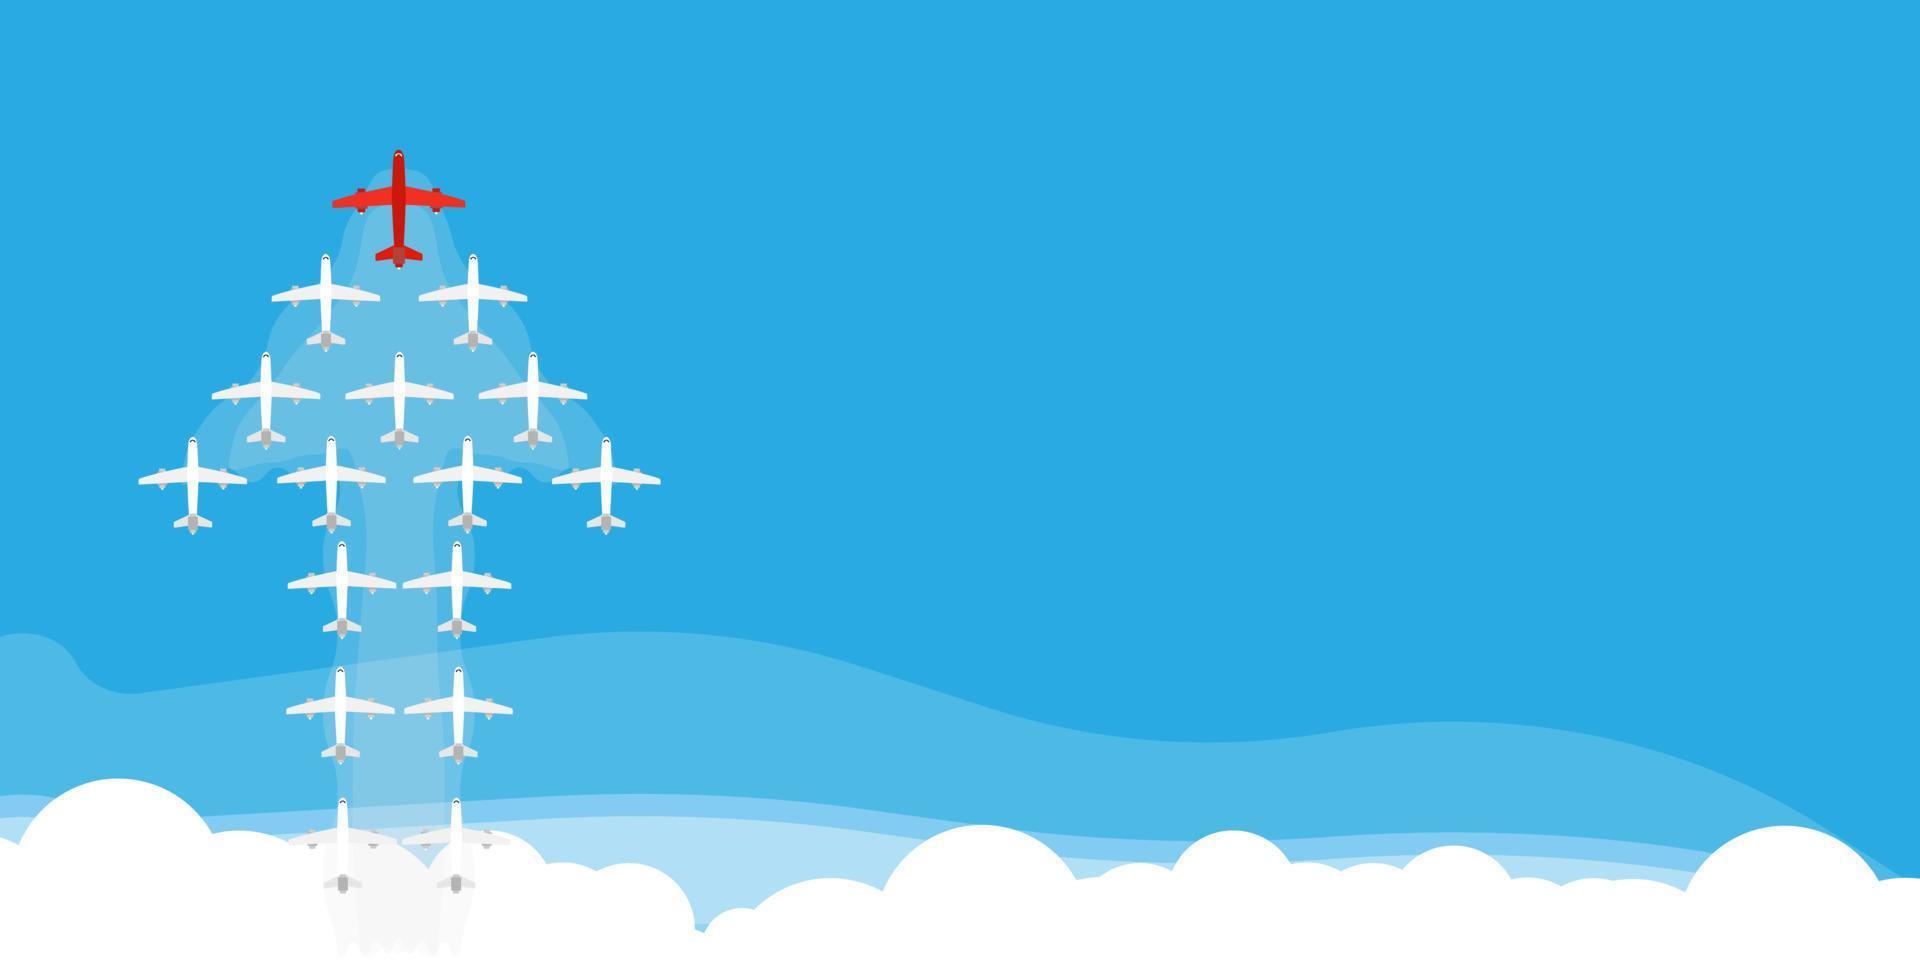 Airplane in form arrow illustration background vector concept creative. Cloud plane blue business teamwork direction red leader. Leadership follow vision idea